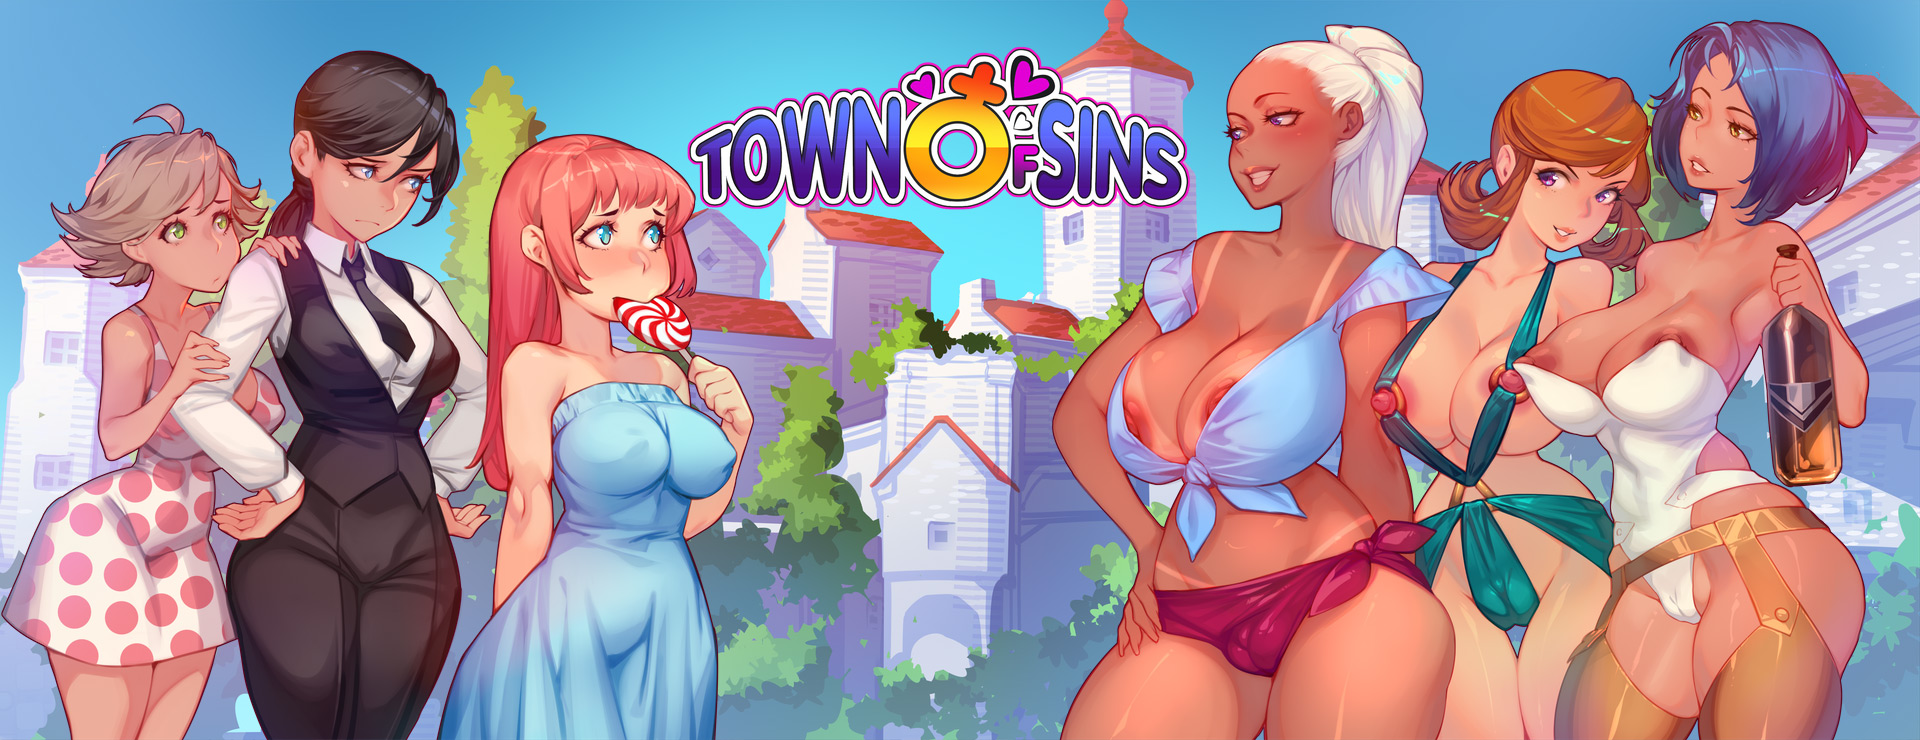 Town of Sins - カード ゲーム